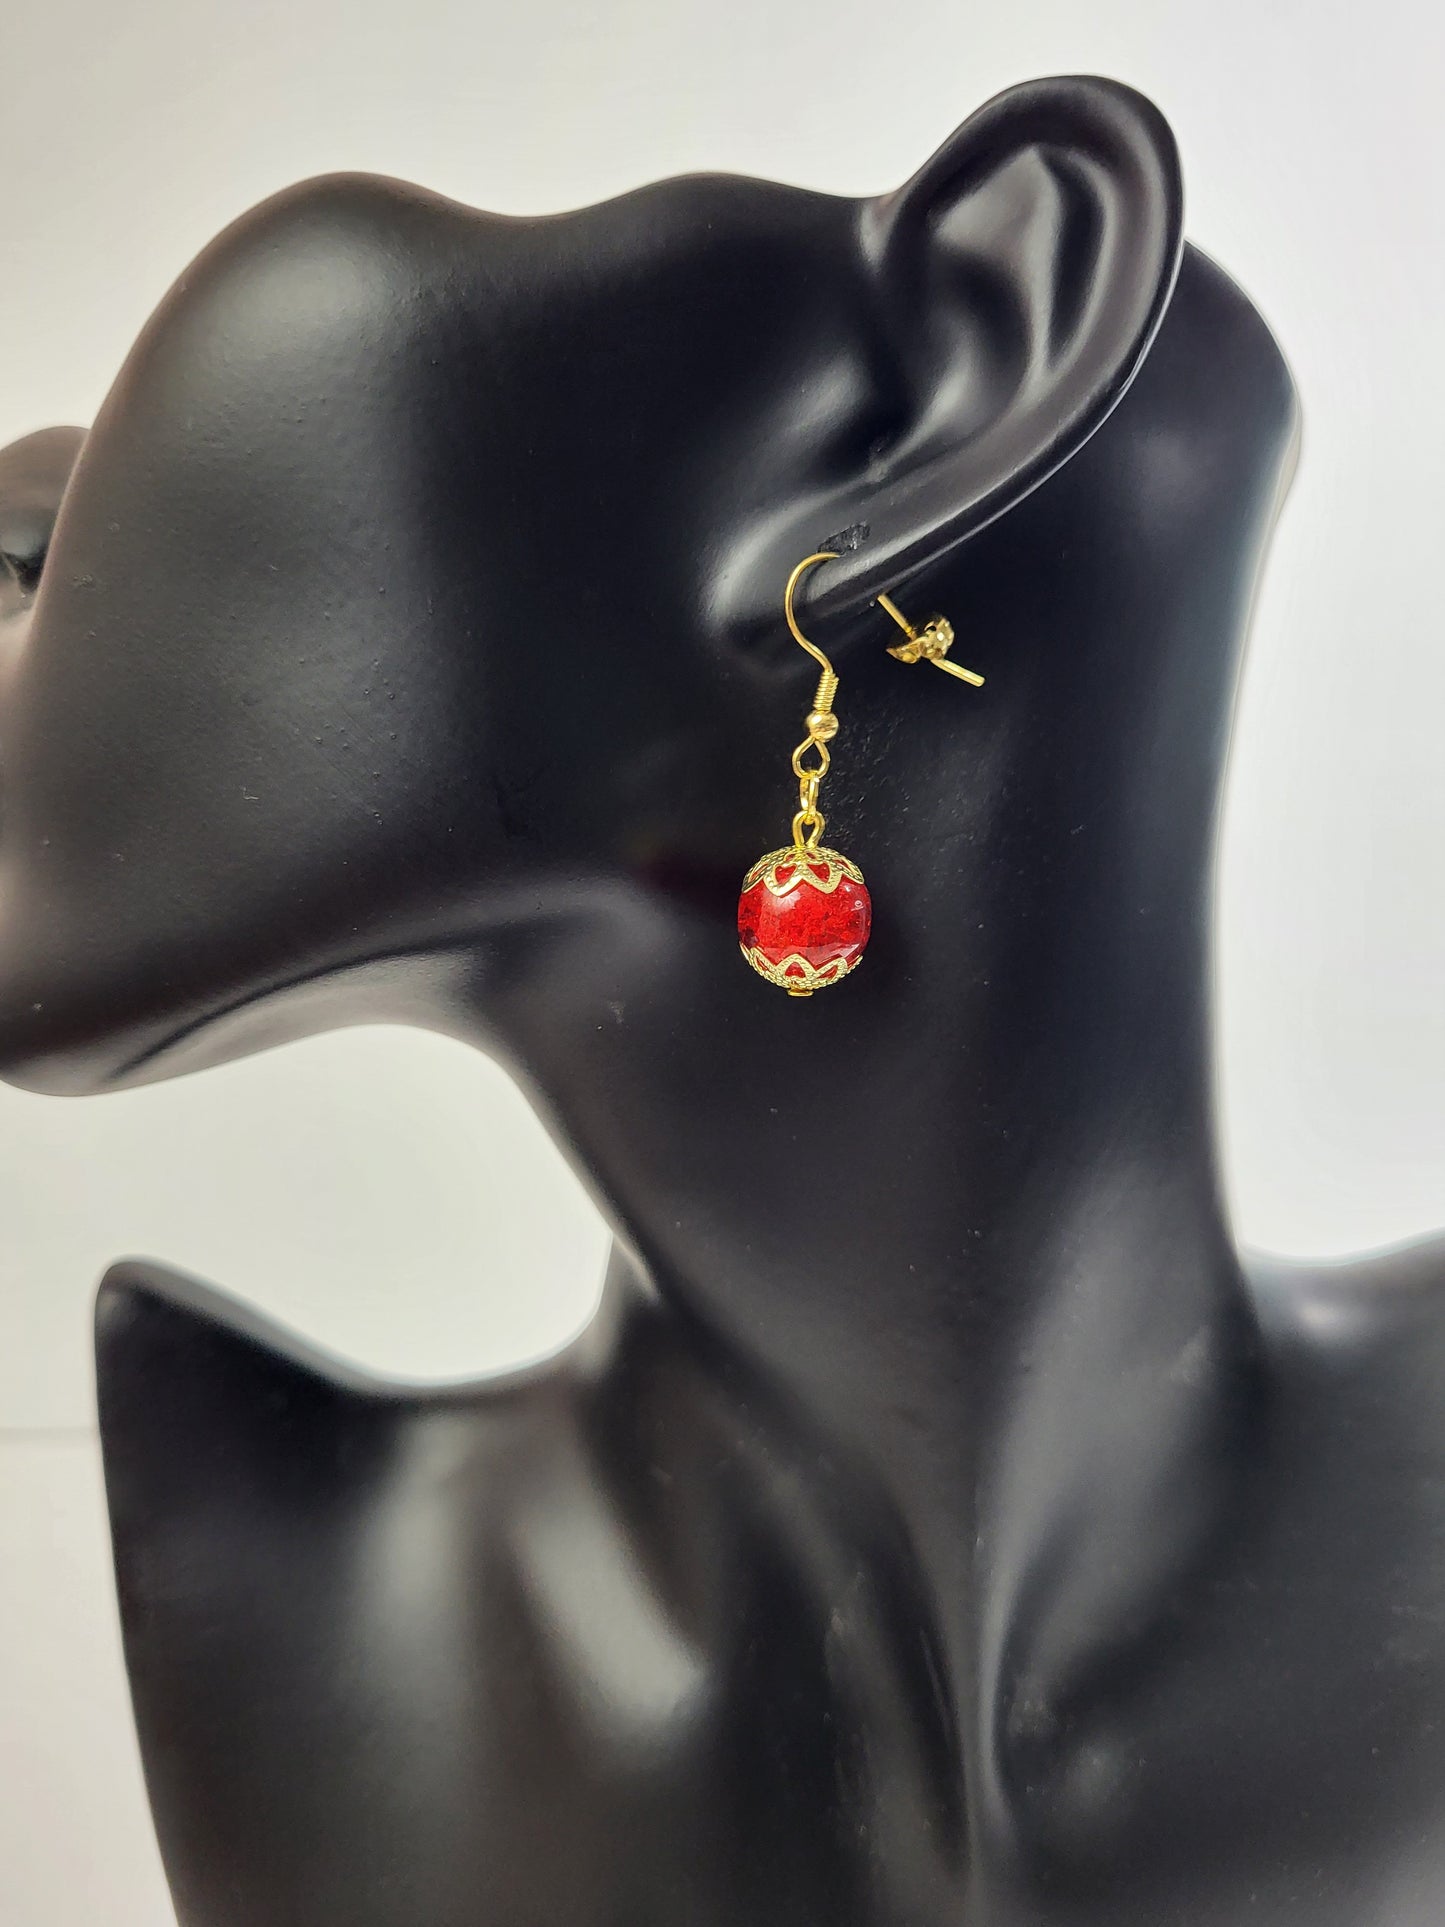 Introducing Ruby Droplet Earrings – a striking blend of passion and elegance that adds a touch of glamour to your ensemble. These exquisite earrings feature captivating red glass beads, each carefully crafted to resemble a radiant ruby. The rich red hue, coupled with delicate gold accents, creates a dazzling combination that is both bold and timeless.